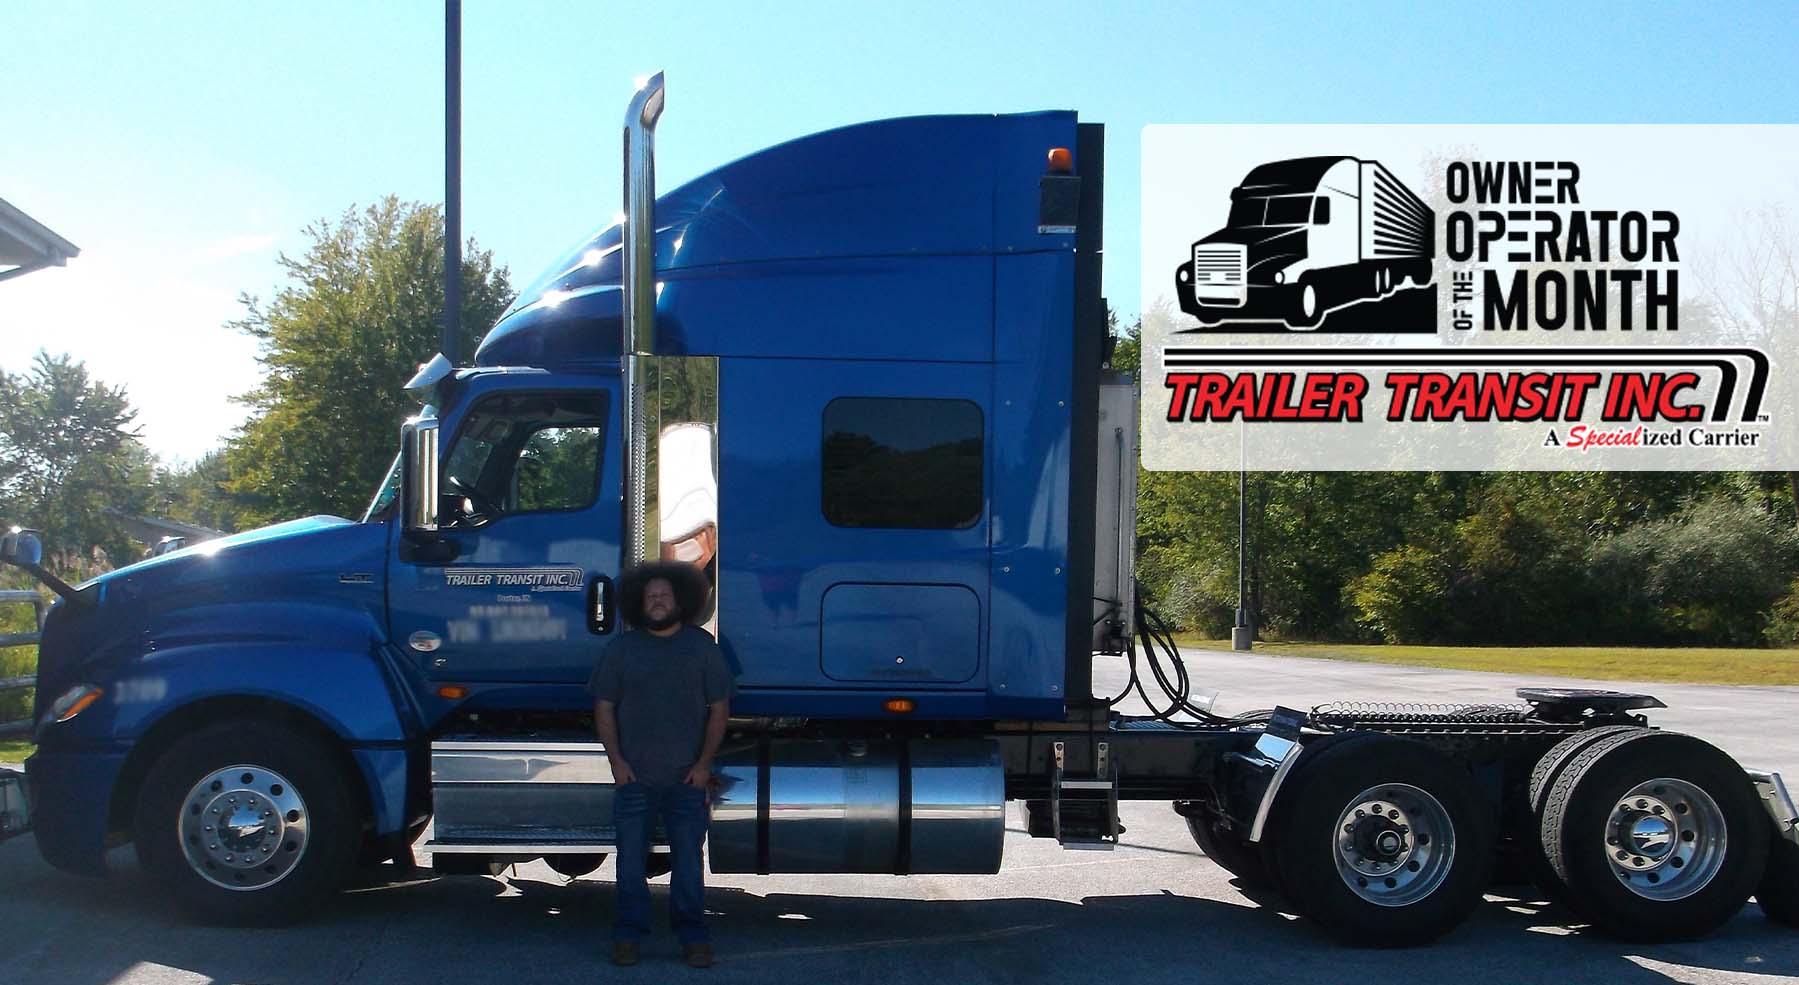 Trailer Transit Inc. | A man (owner operator) standing in front of a semi truck.